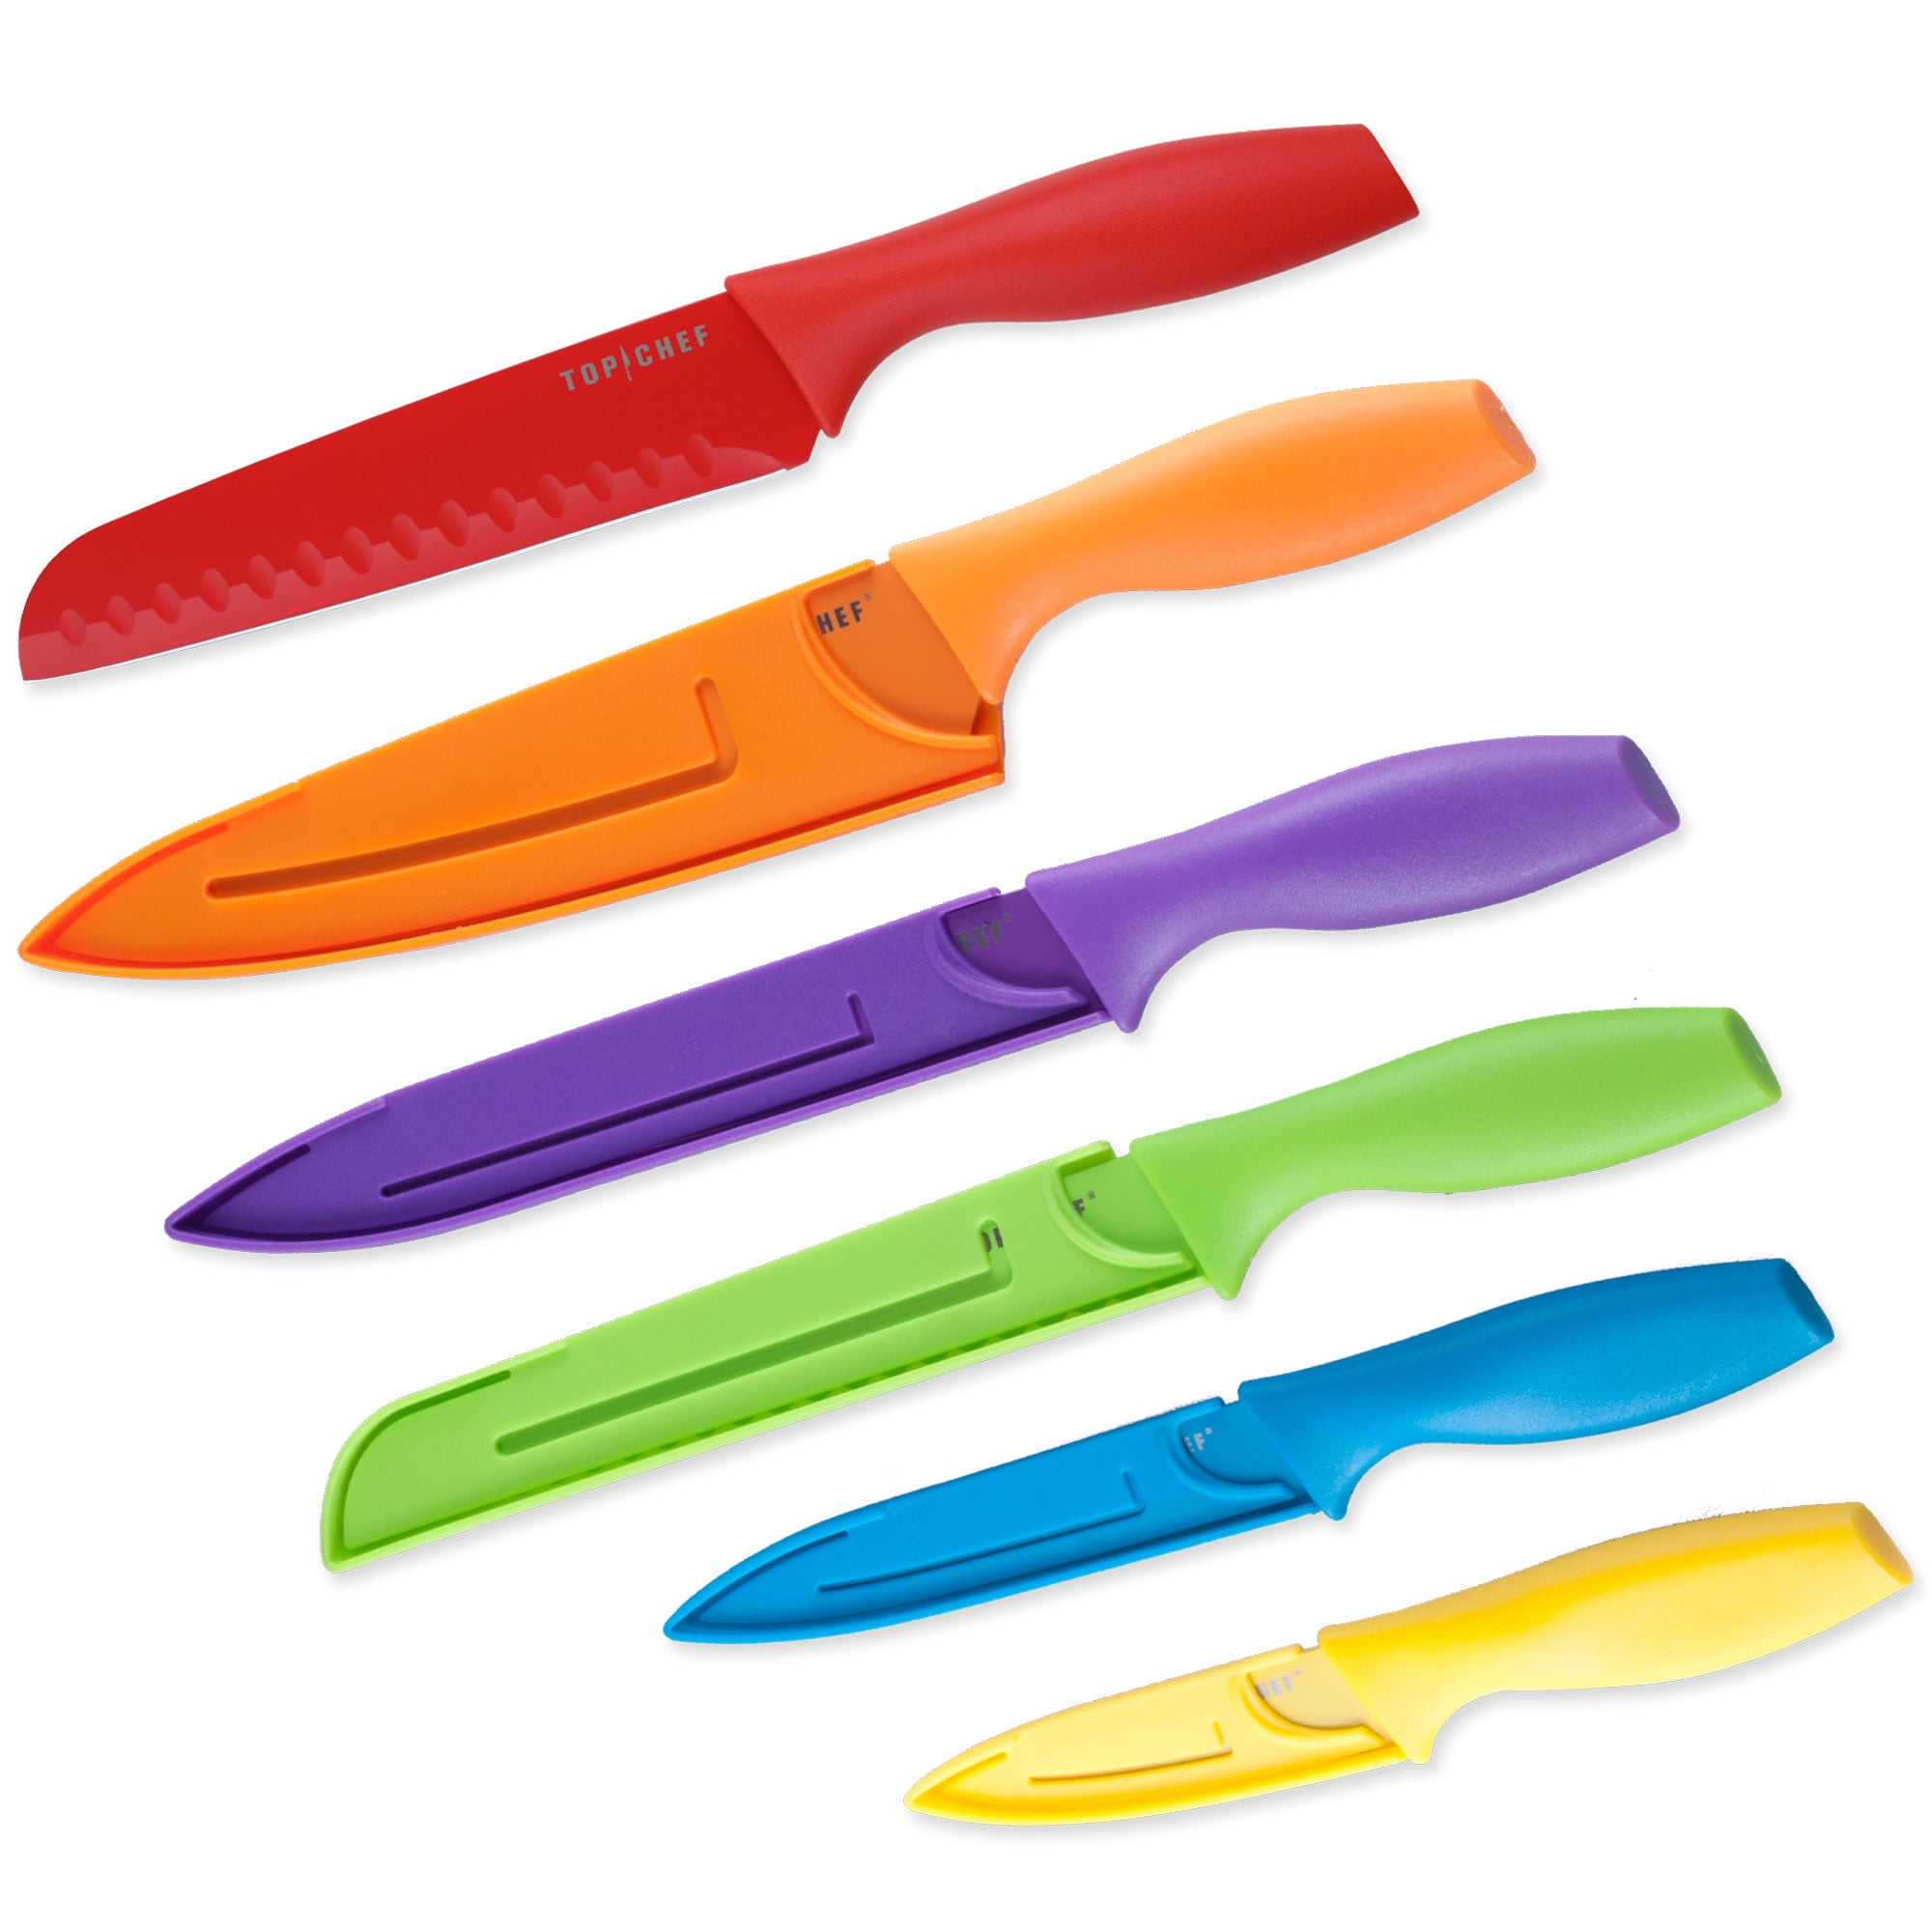 This $17 color-coded knife set with blade covers is perfect for summer